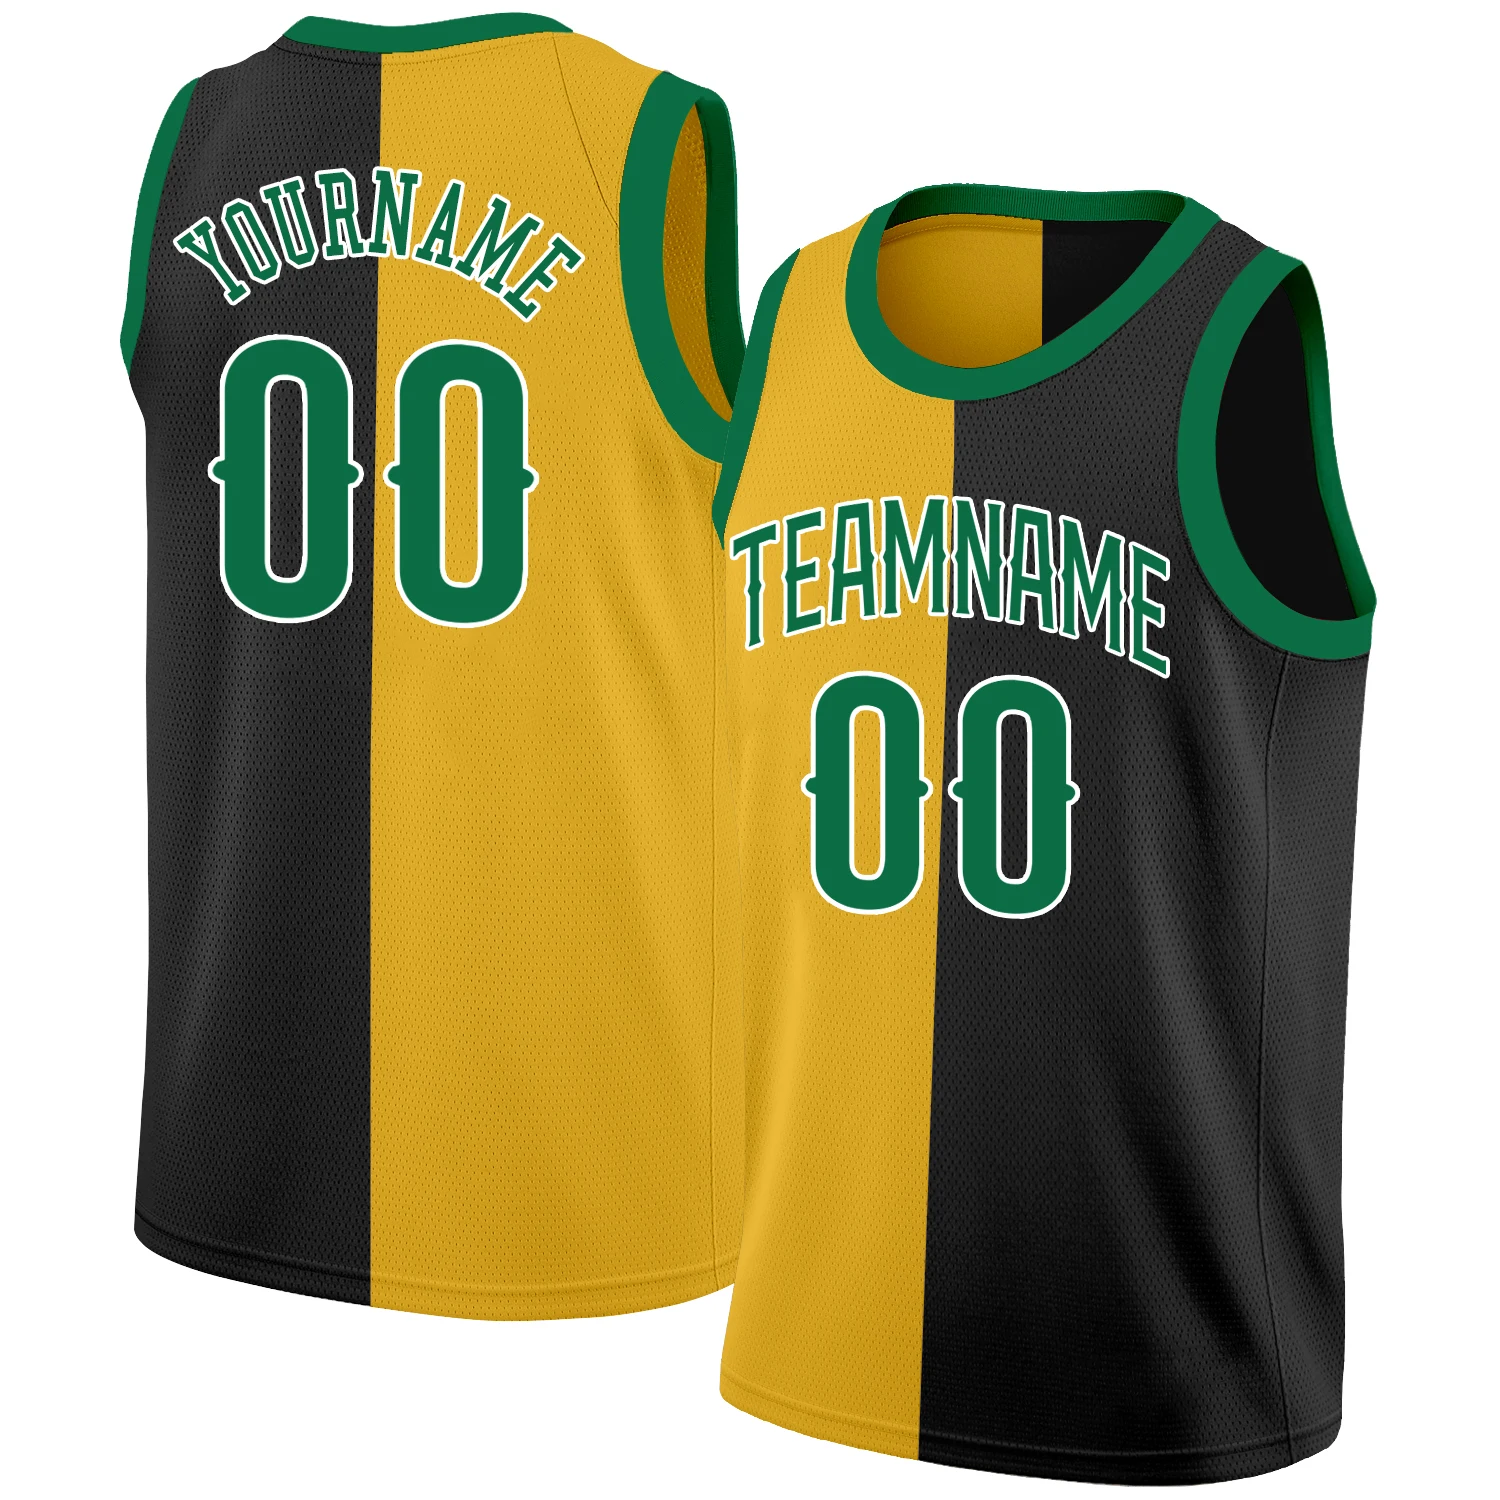 Custom Basketball Jersey Full Sublimation Team Name/Number Active  Breathable Training Athletic Round-Neck Shirts for Adults/Kids - AliExpress